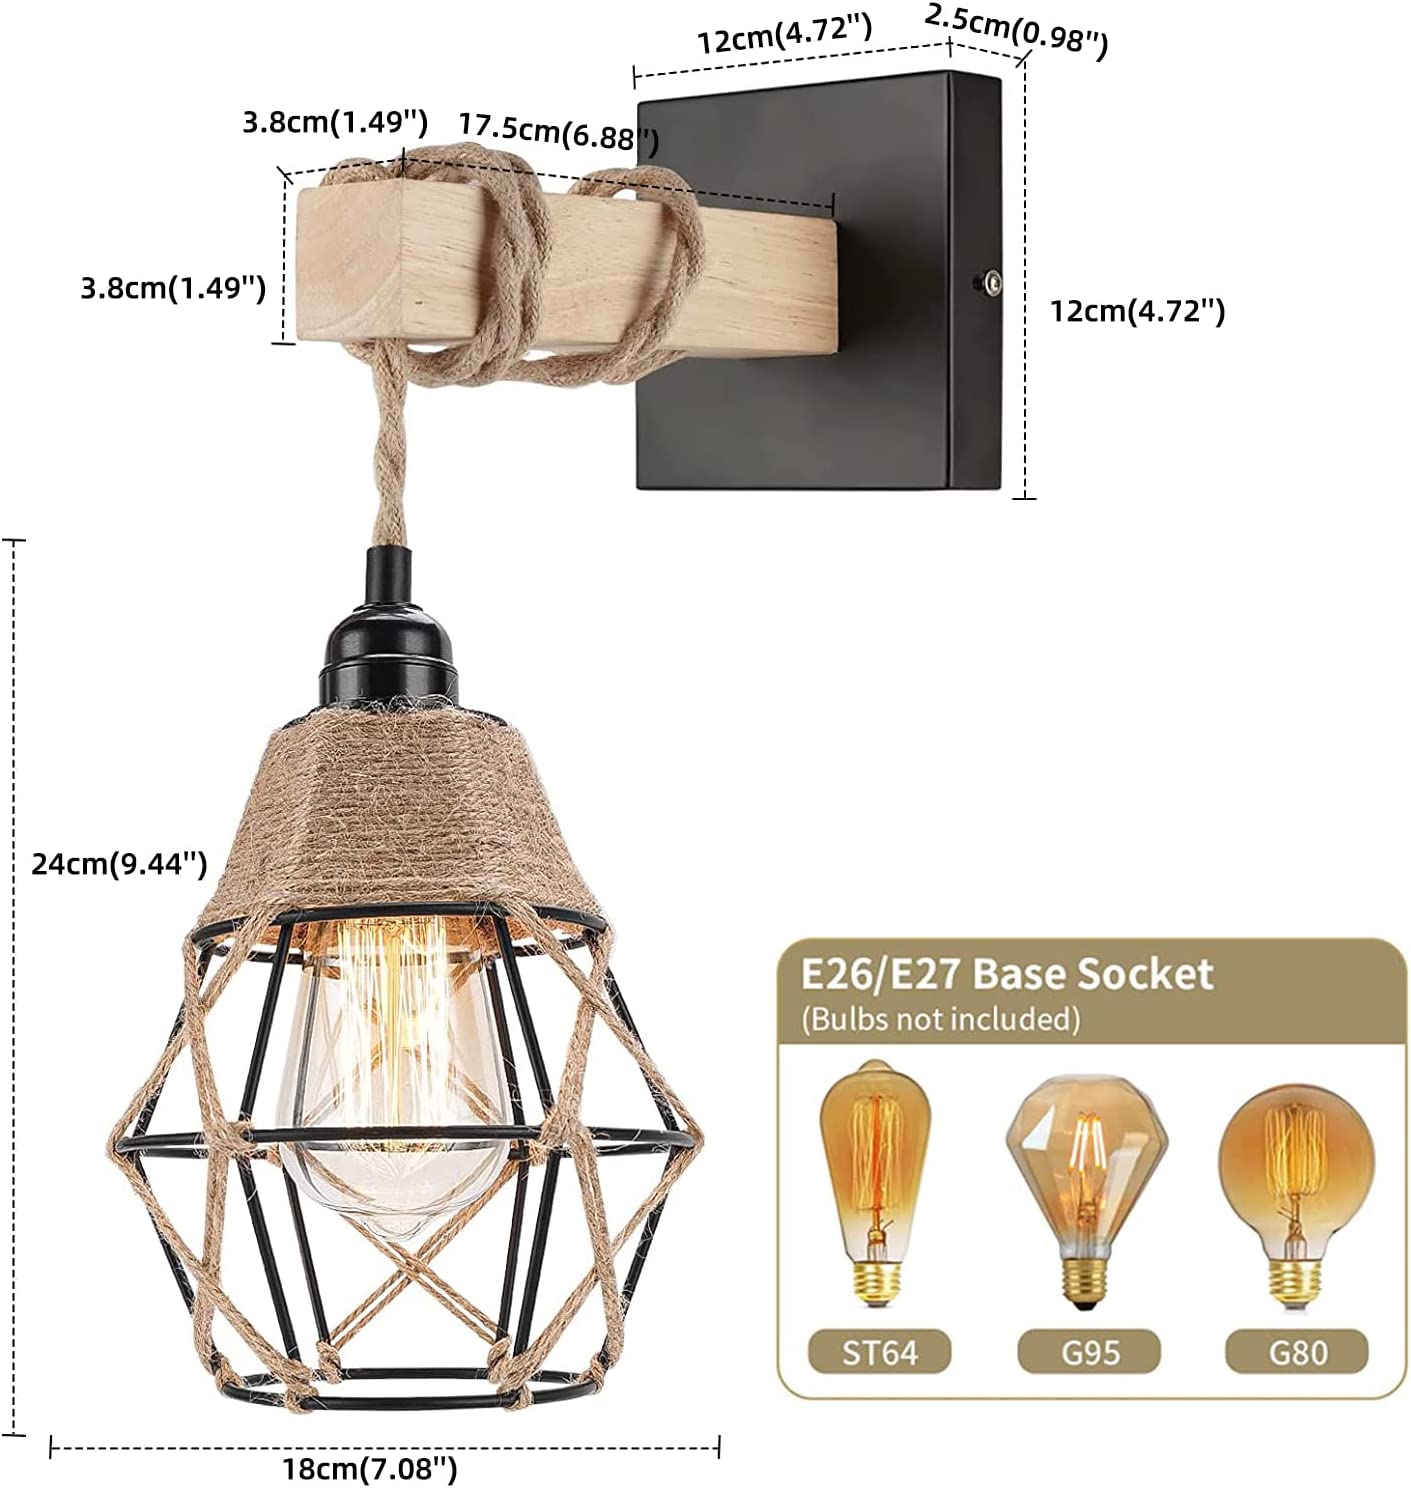 Farmhouse wall sconce black rust cage wall light fixture